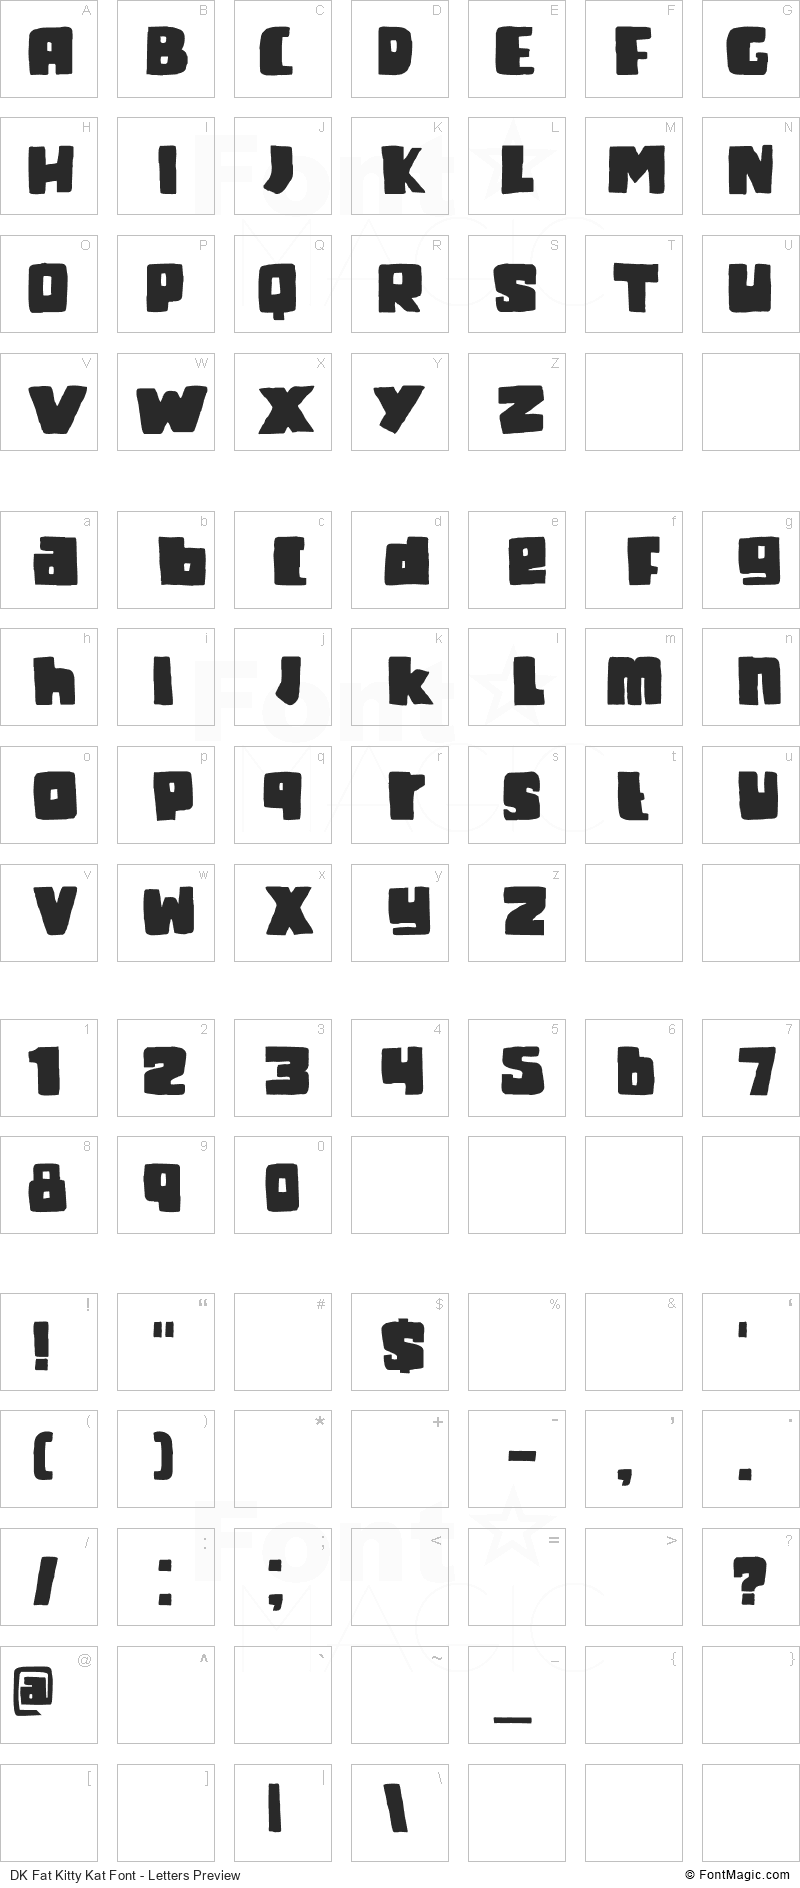 DK Fat Kitty Kat Font - All Latters Preview Chart